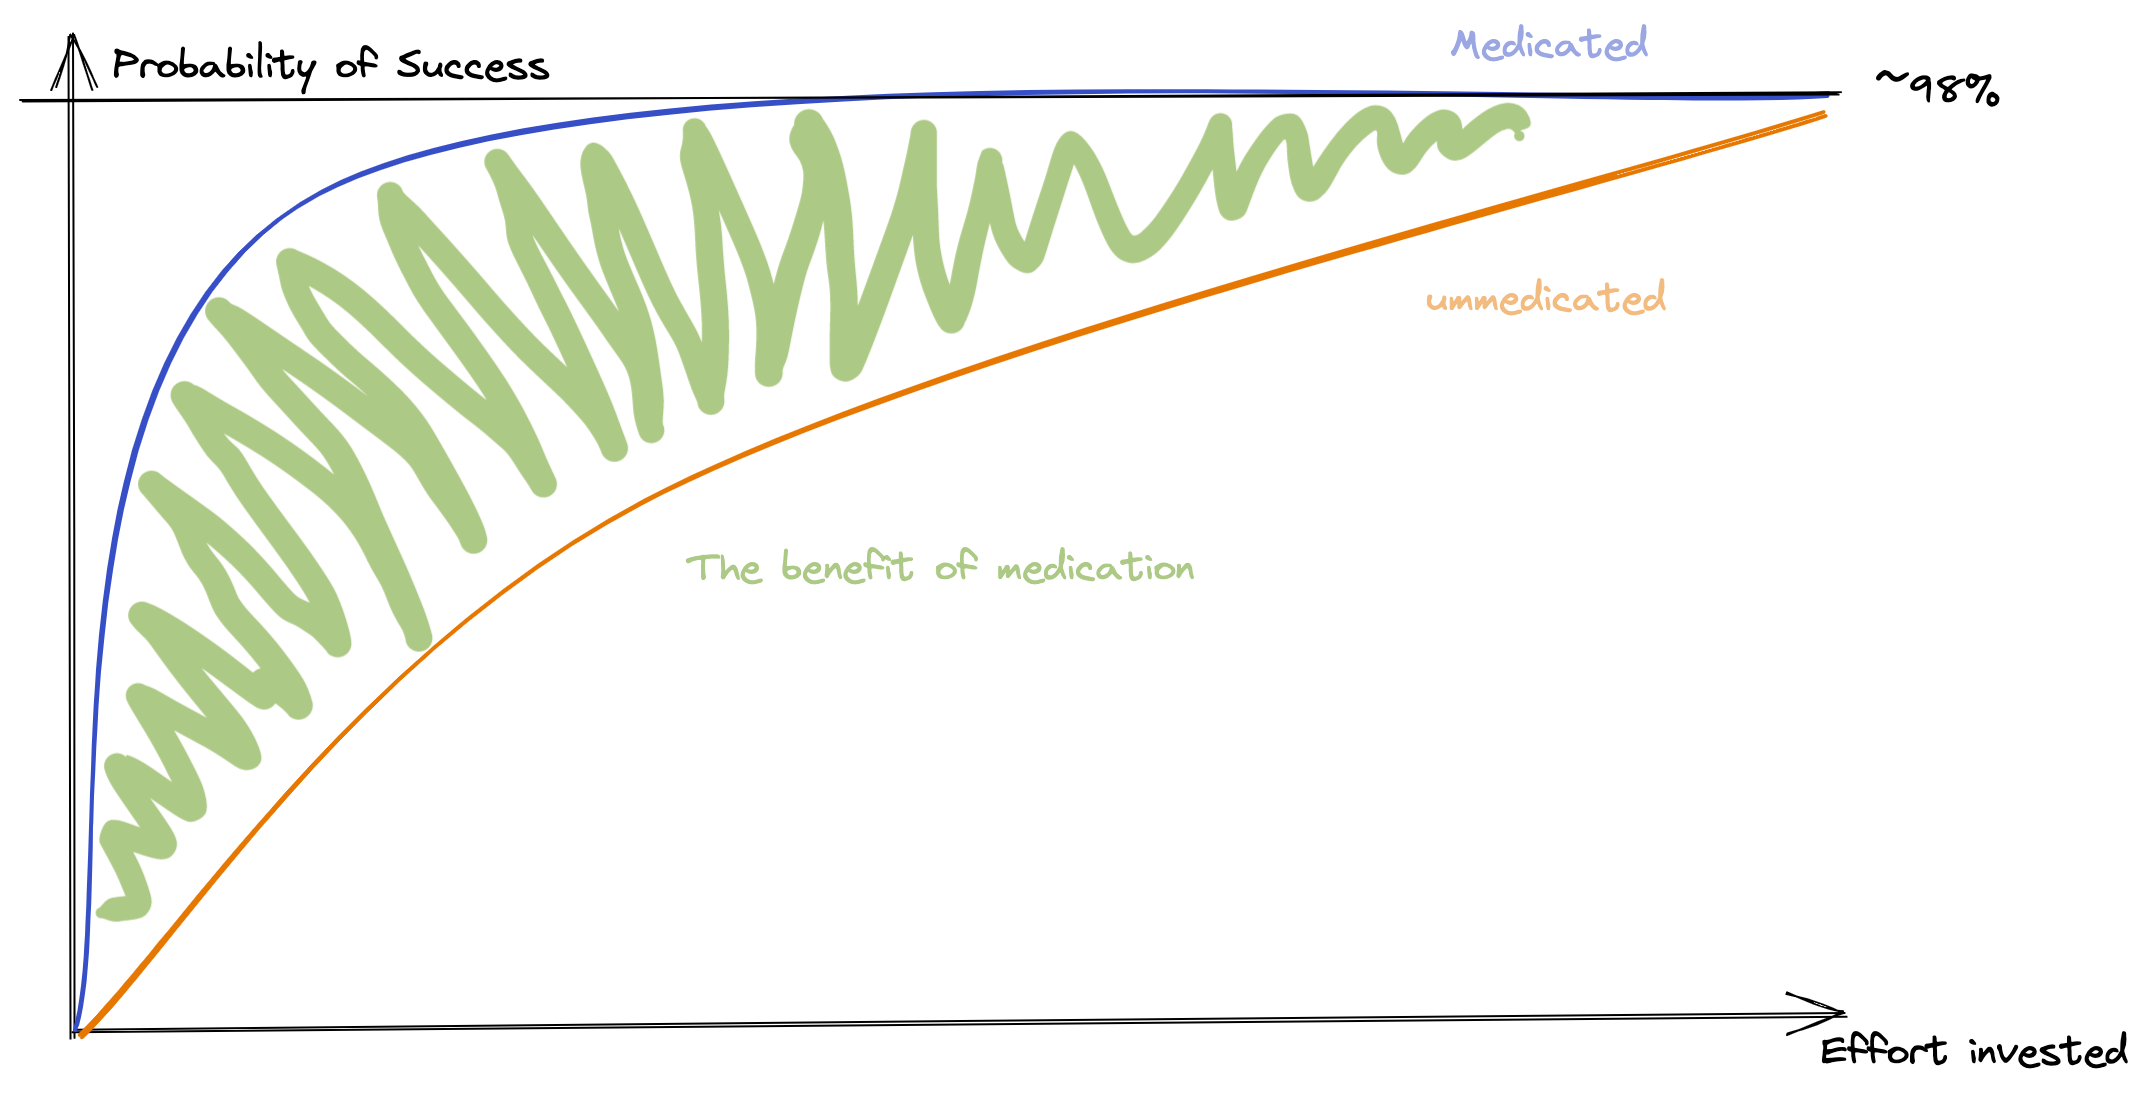 Graph along the axes of "Effort invested" and "probability of success". The
curve of being medicated is significantly steeper than the unmedicated curve,
allowing for higher probability of success with less effort.